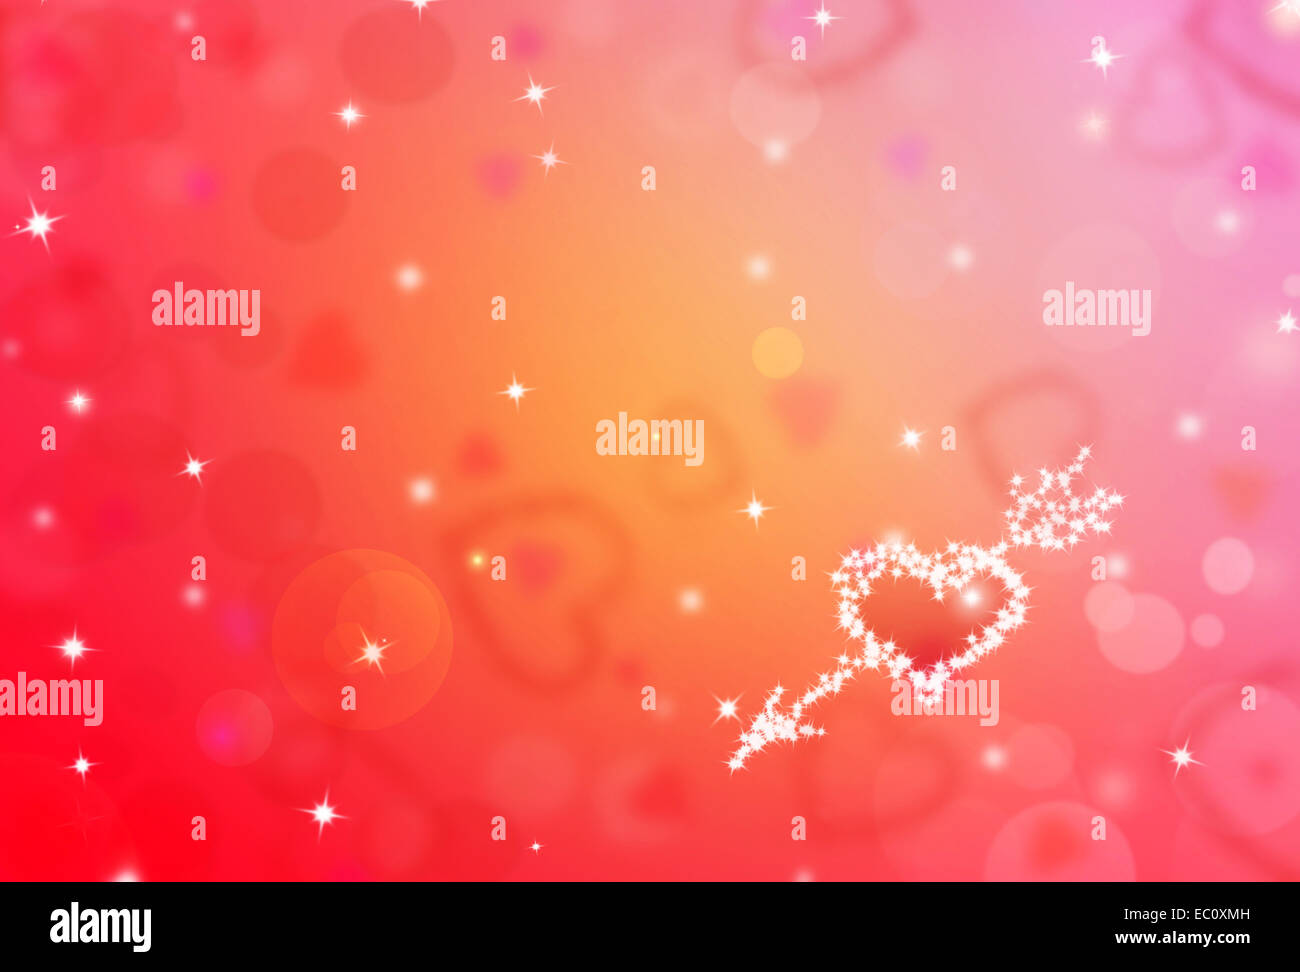 St.Valentine red background with shining heart shape stars and bokeh Stock Photo